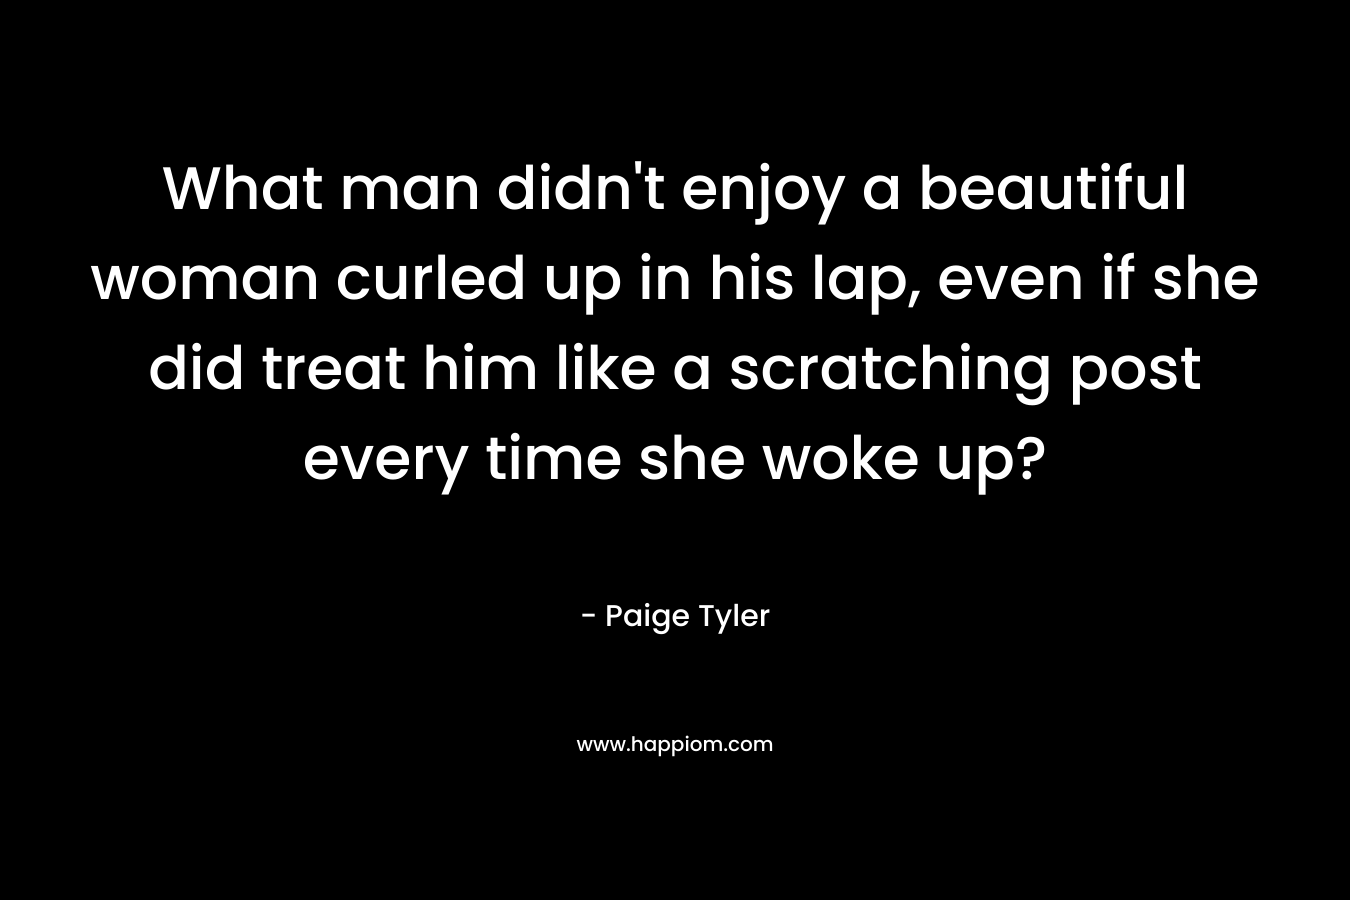 What man didn't enjoy a beautiful woman curled up in his lap, even if she did treat him like a scratching post every time she woke up?